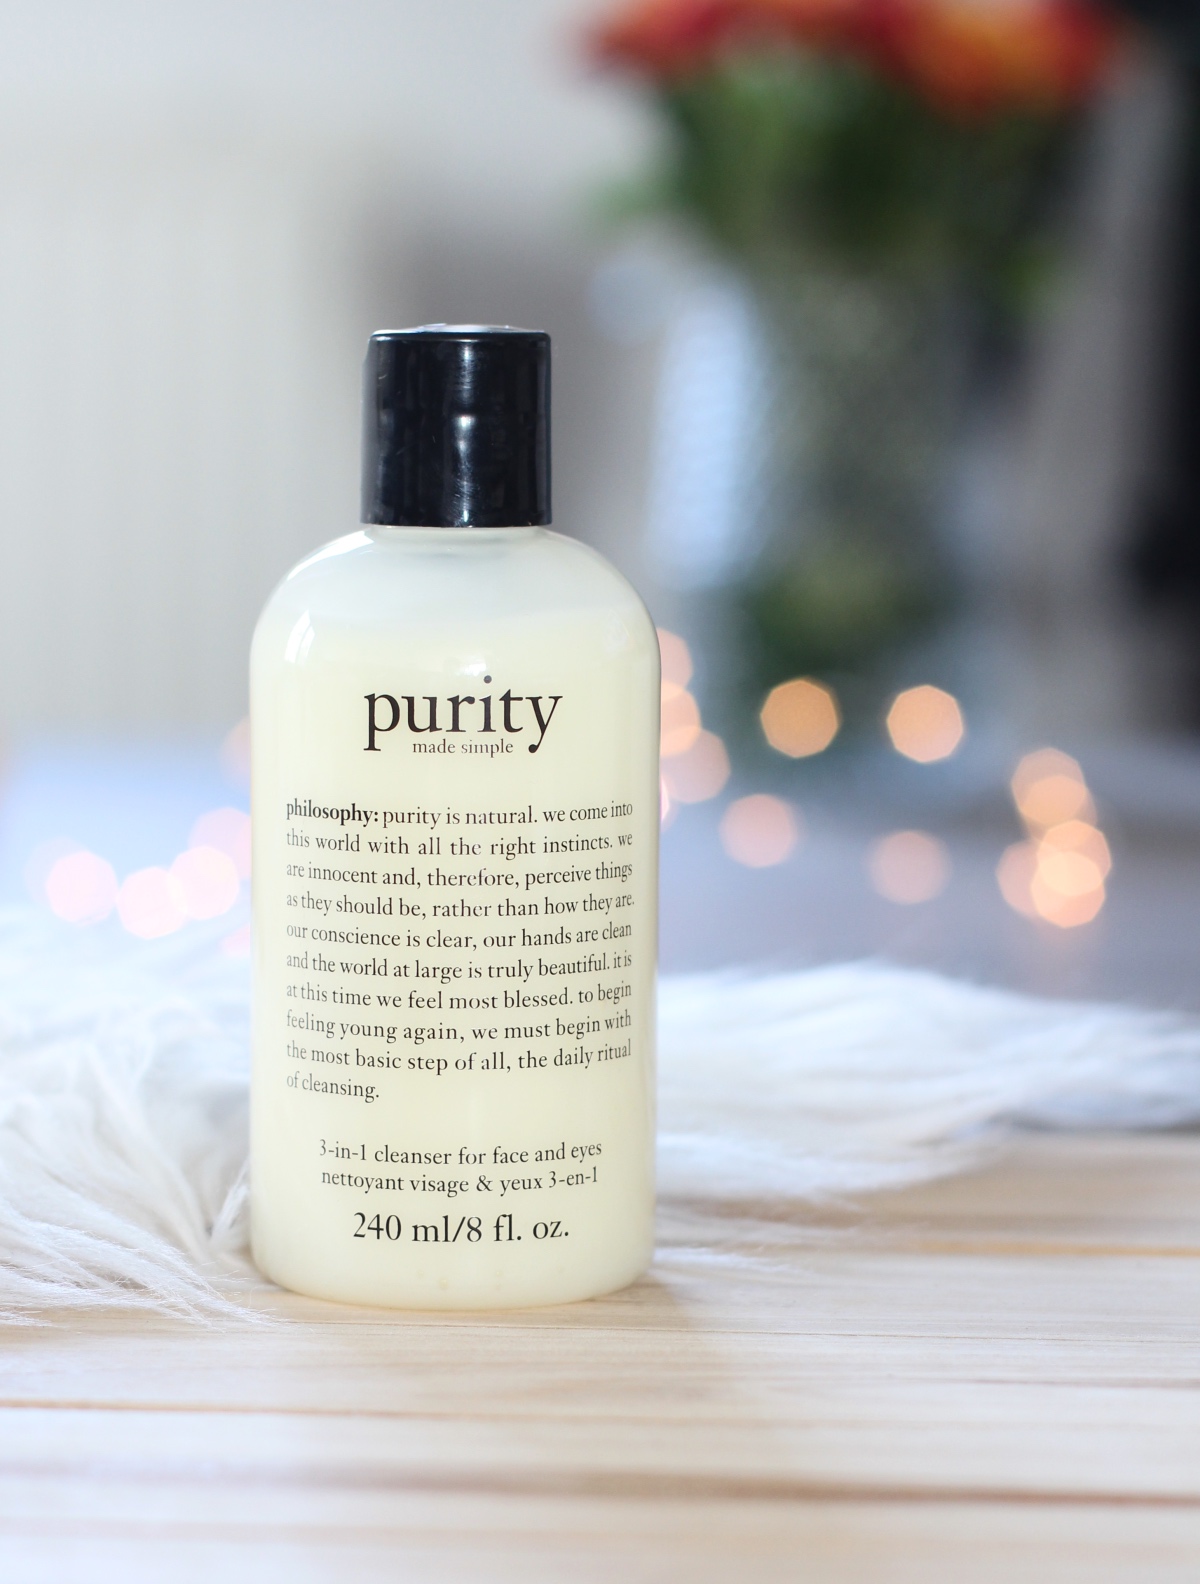 philosophy purity 3-in-1 cleanser